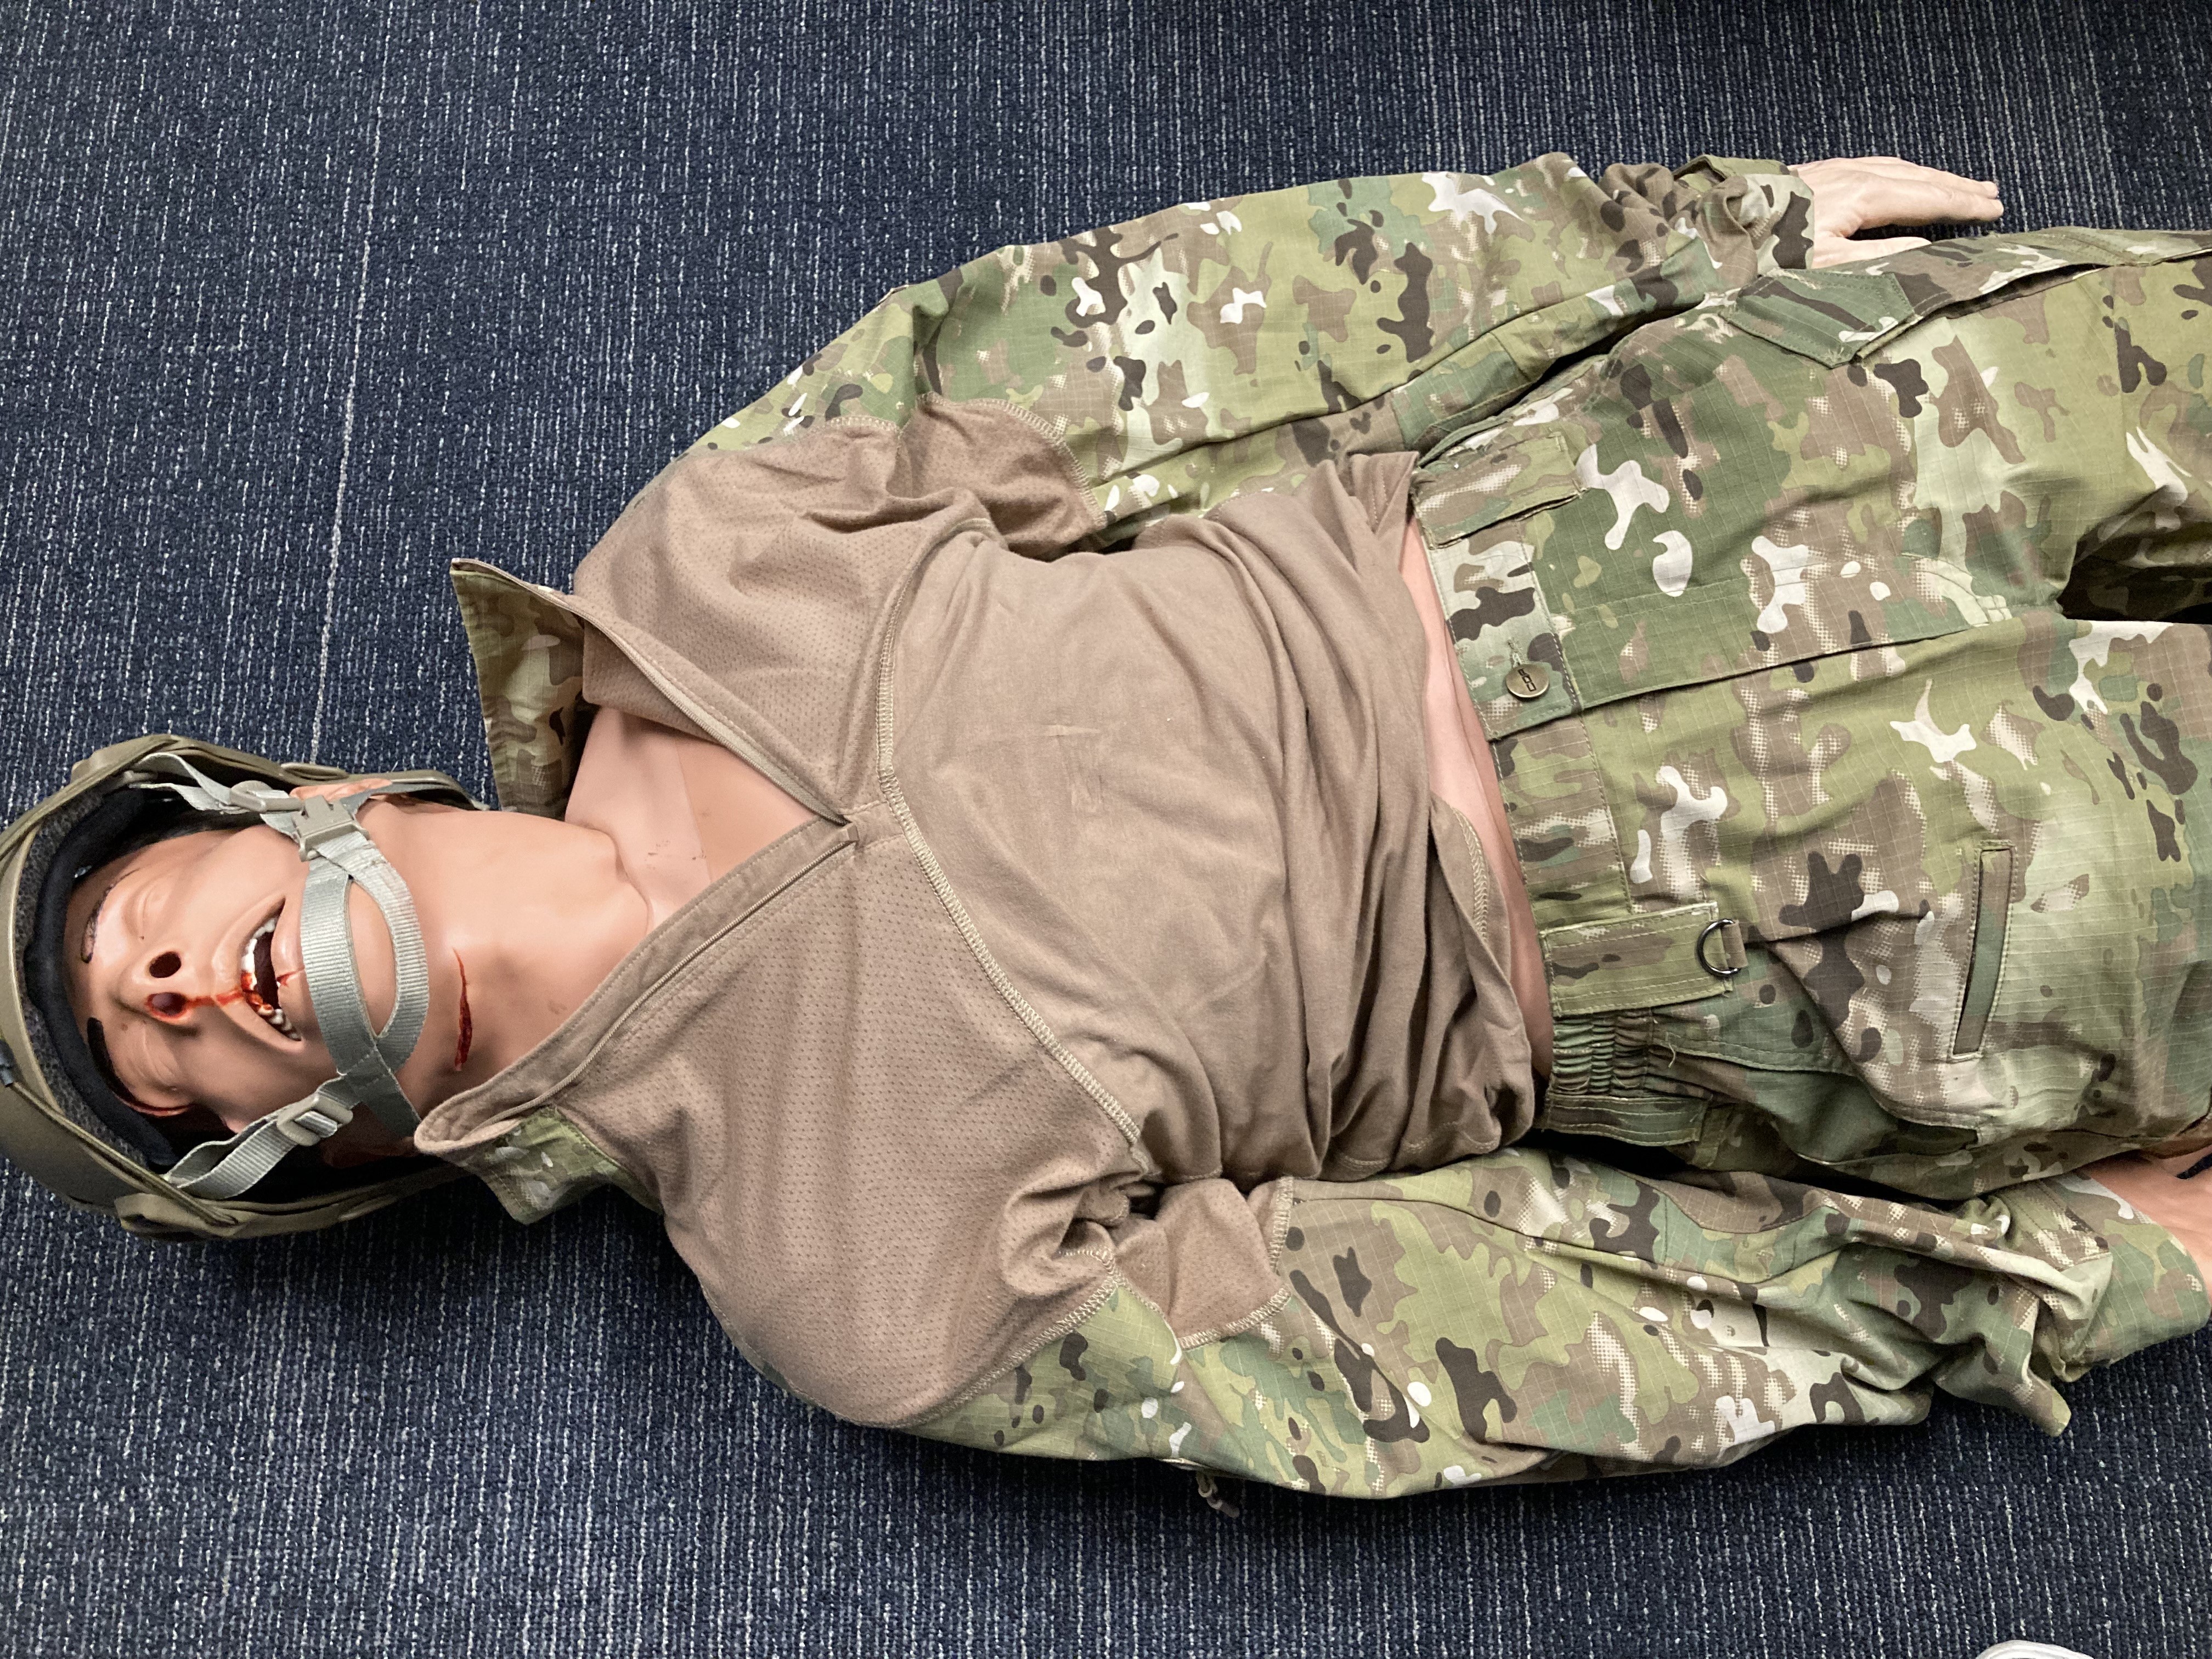 A patient simulator with a helmet, lying on the floor.